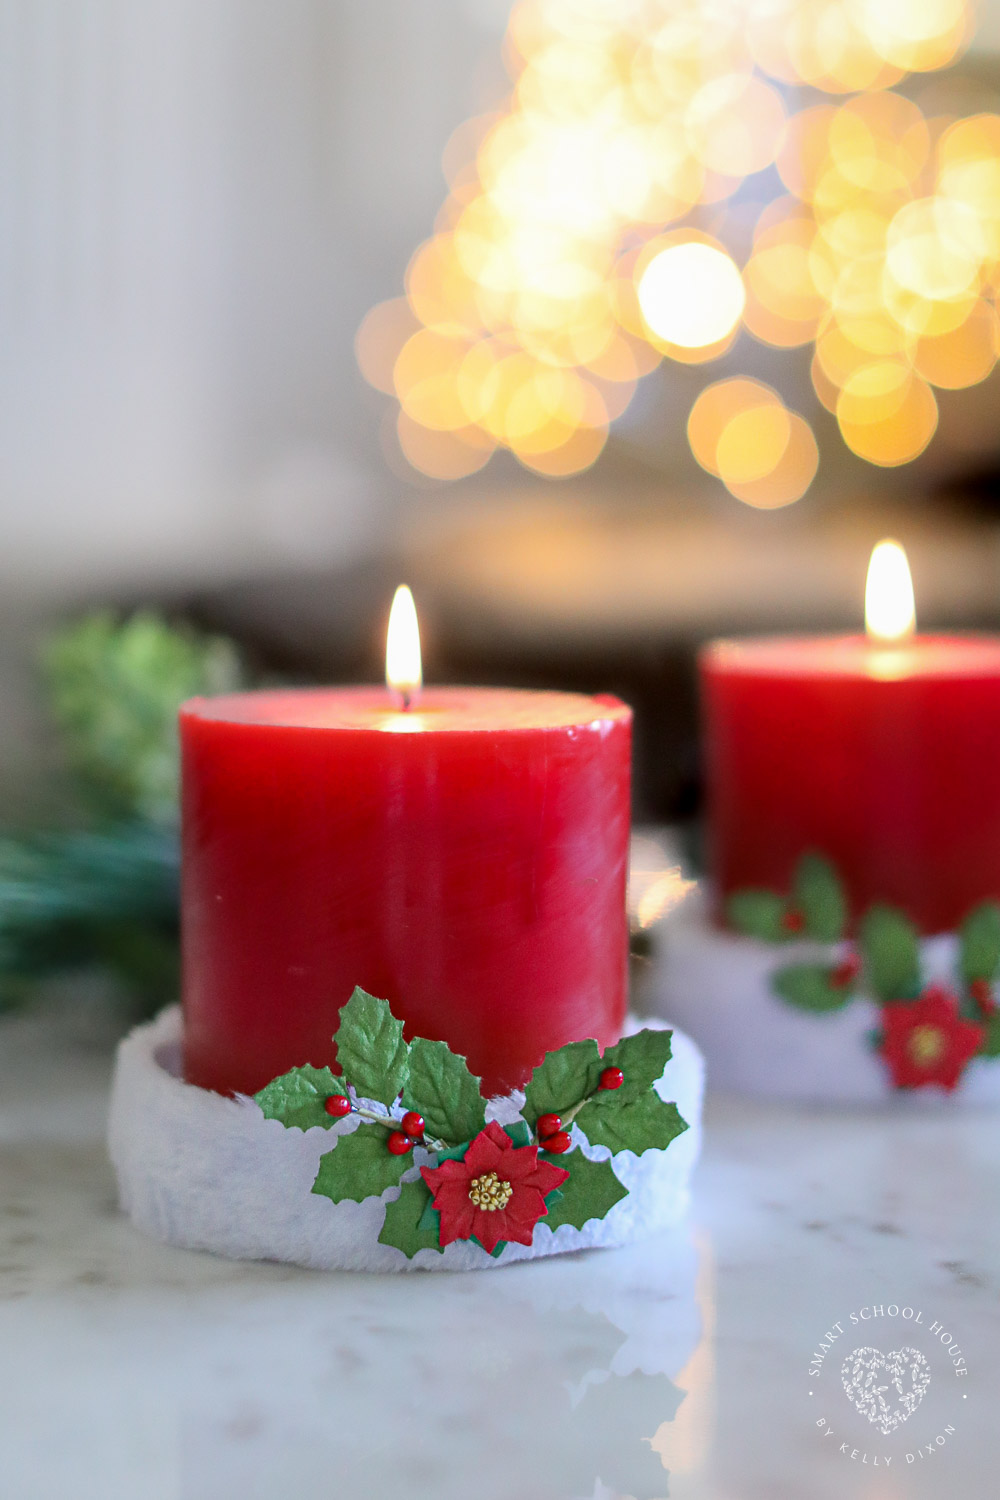 DIY Santa Hat Candle for Christmas! How to make an adorable Santa Hat Candle that can beautifully add to your holiday decor. 